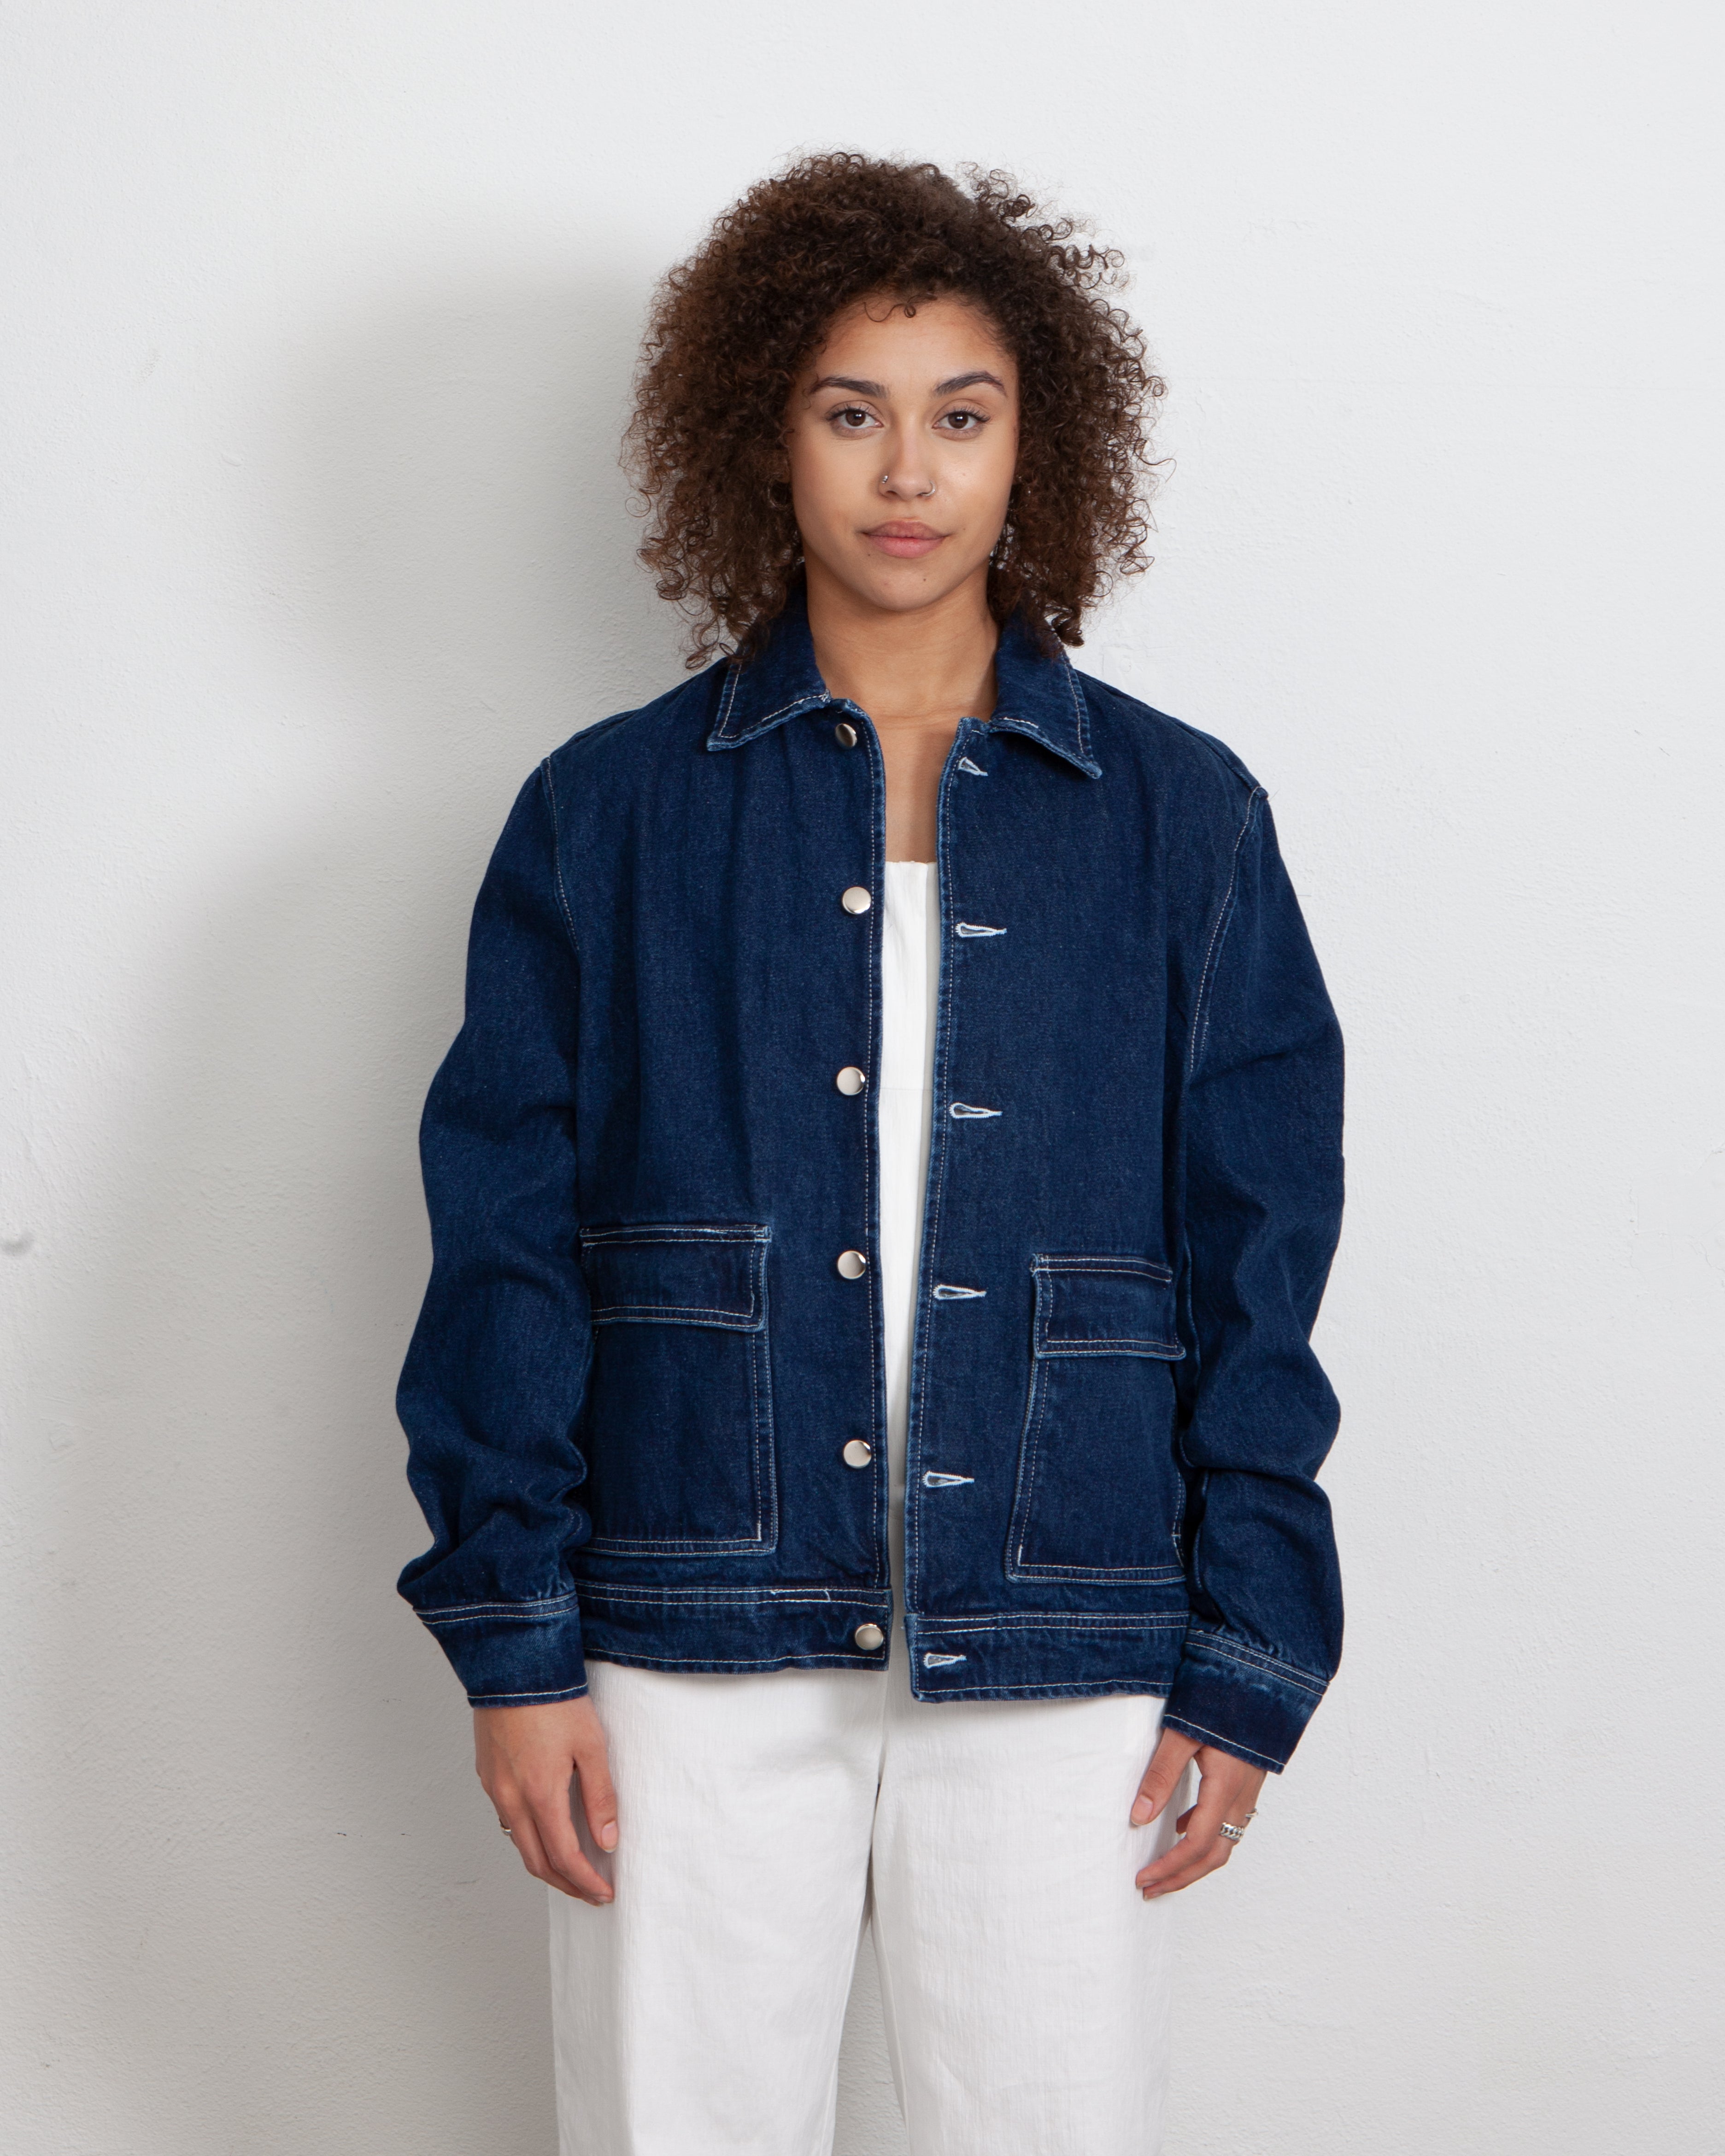 Outfit Picks week 12 POP Trading Company Full Button Jacket Rinsed Denim